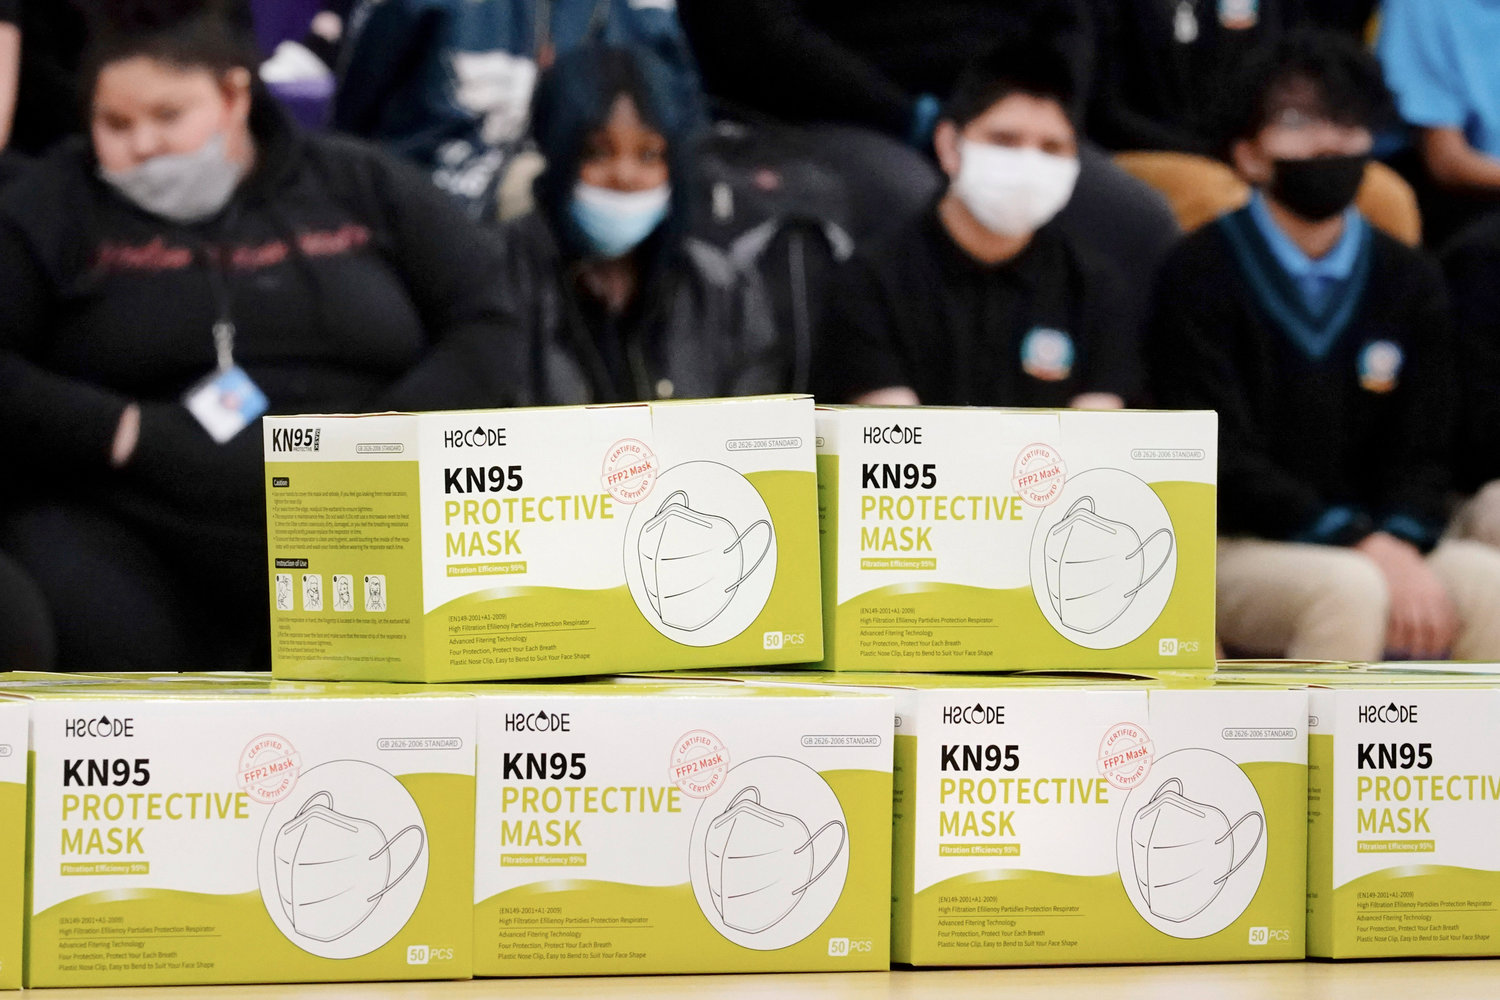 MASKS — Boxes of KN95 protective masks are stacked together before being distributed to students at Camden High School in Camden, N.J., Wednesday, Feb. 9, 2022. According to a study by the Centers for Disease Control and Prevention released Tuesday, April 26, 2022,  three out of every four U.S. children have been infected with COVID-19. The positivity rate in the Mohawk Valley topped 10% on Wednesday, according to state statistics.